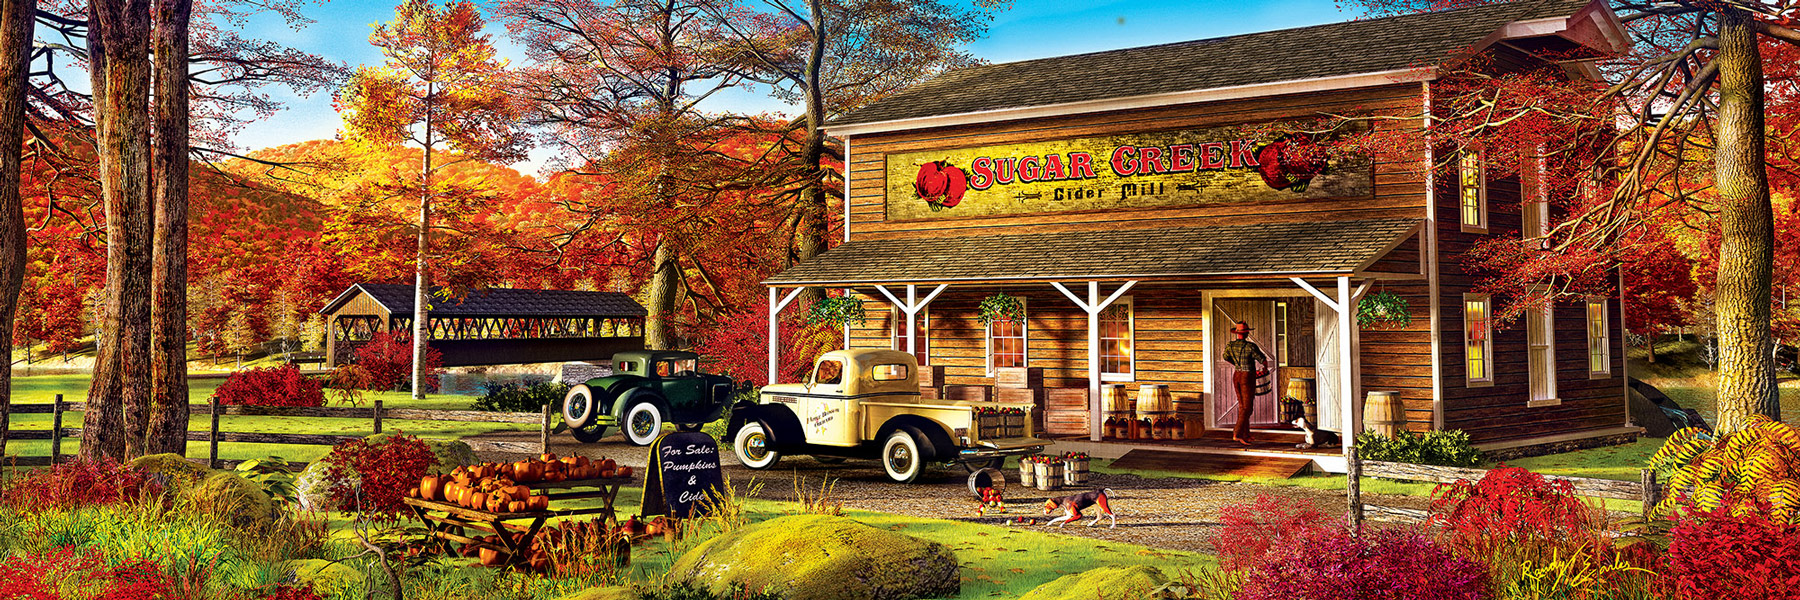 Sugar Creek Cider Mill - Scratch and Dent Countryside Jigsaw Puzzle